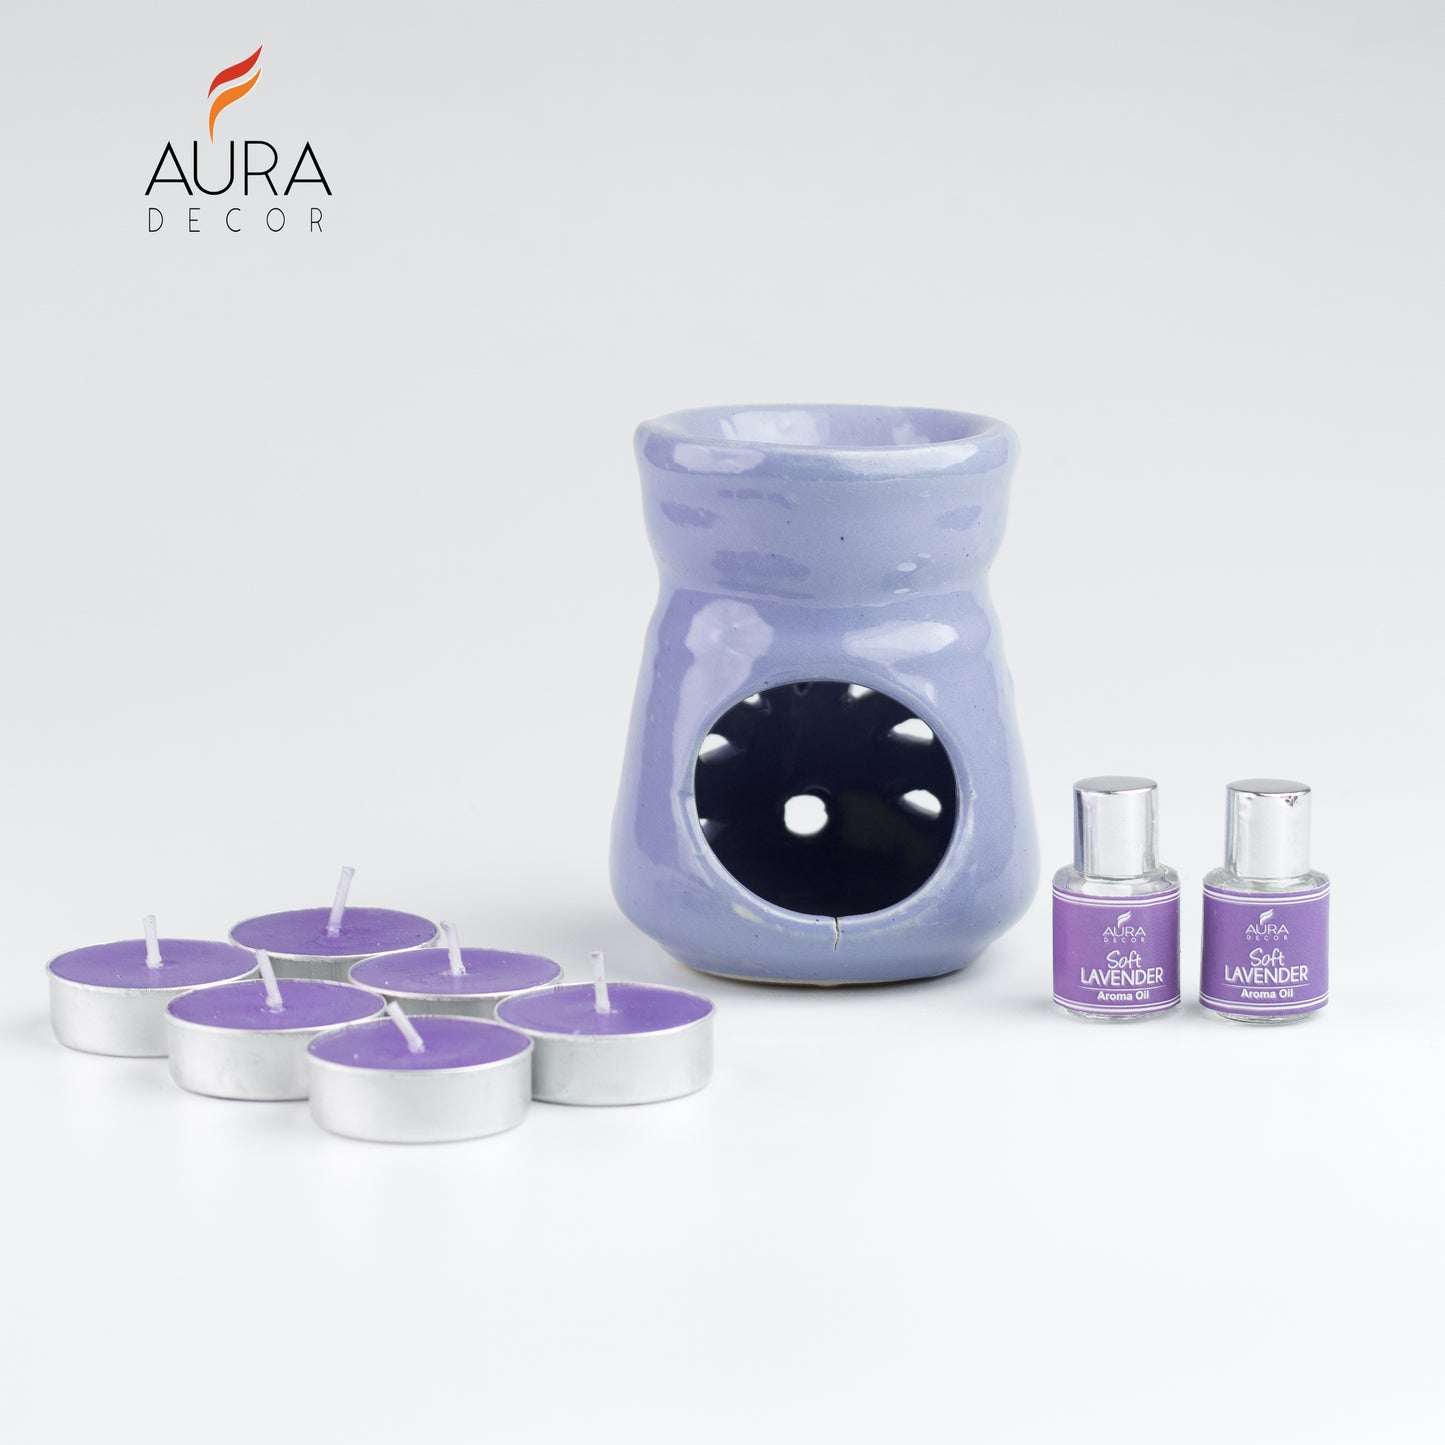 AuraDecor Aromatheraphy Diffuser Gift Set with 6 Tealights